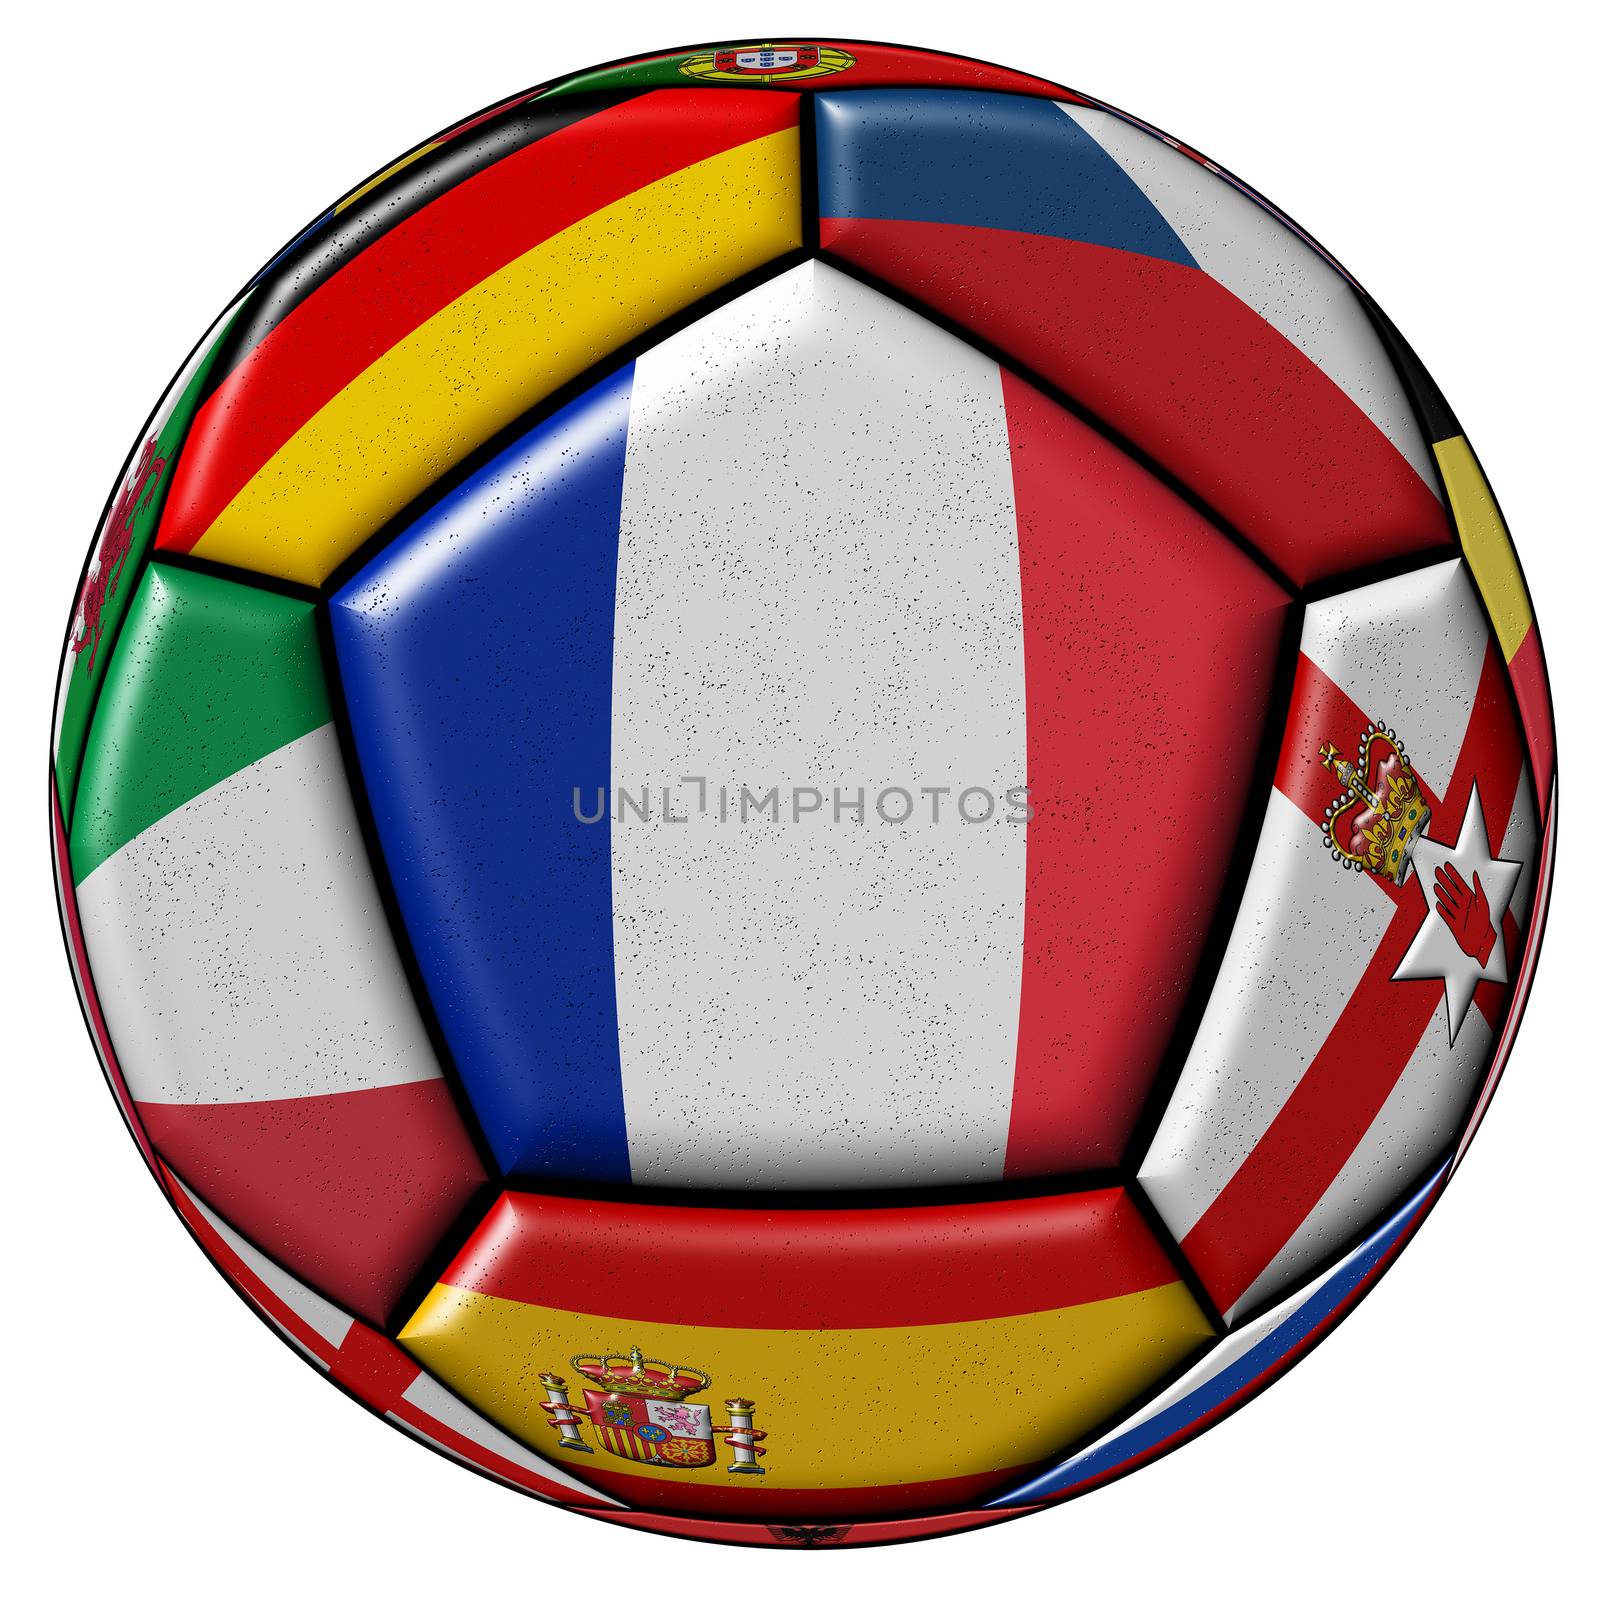 Soccer ball on a white background with flags of European countries - flag of France in the center